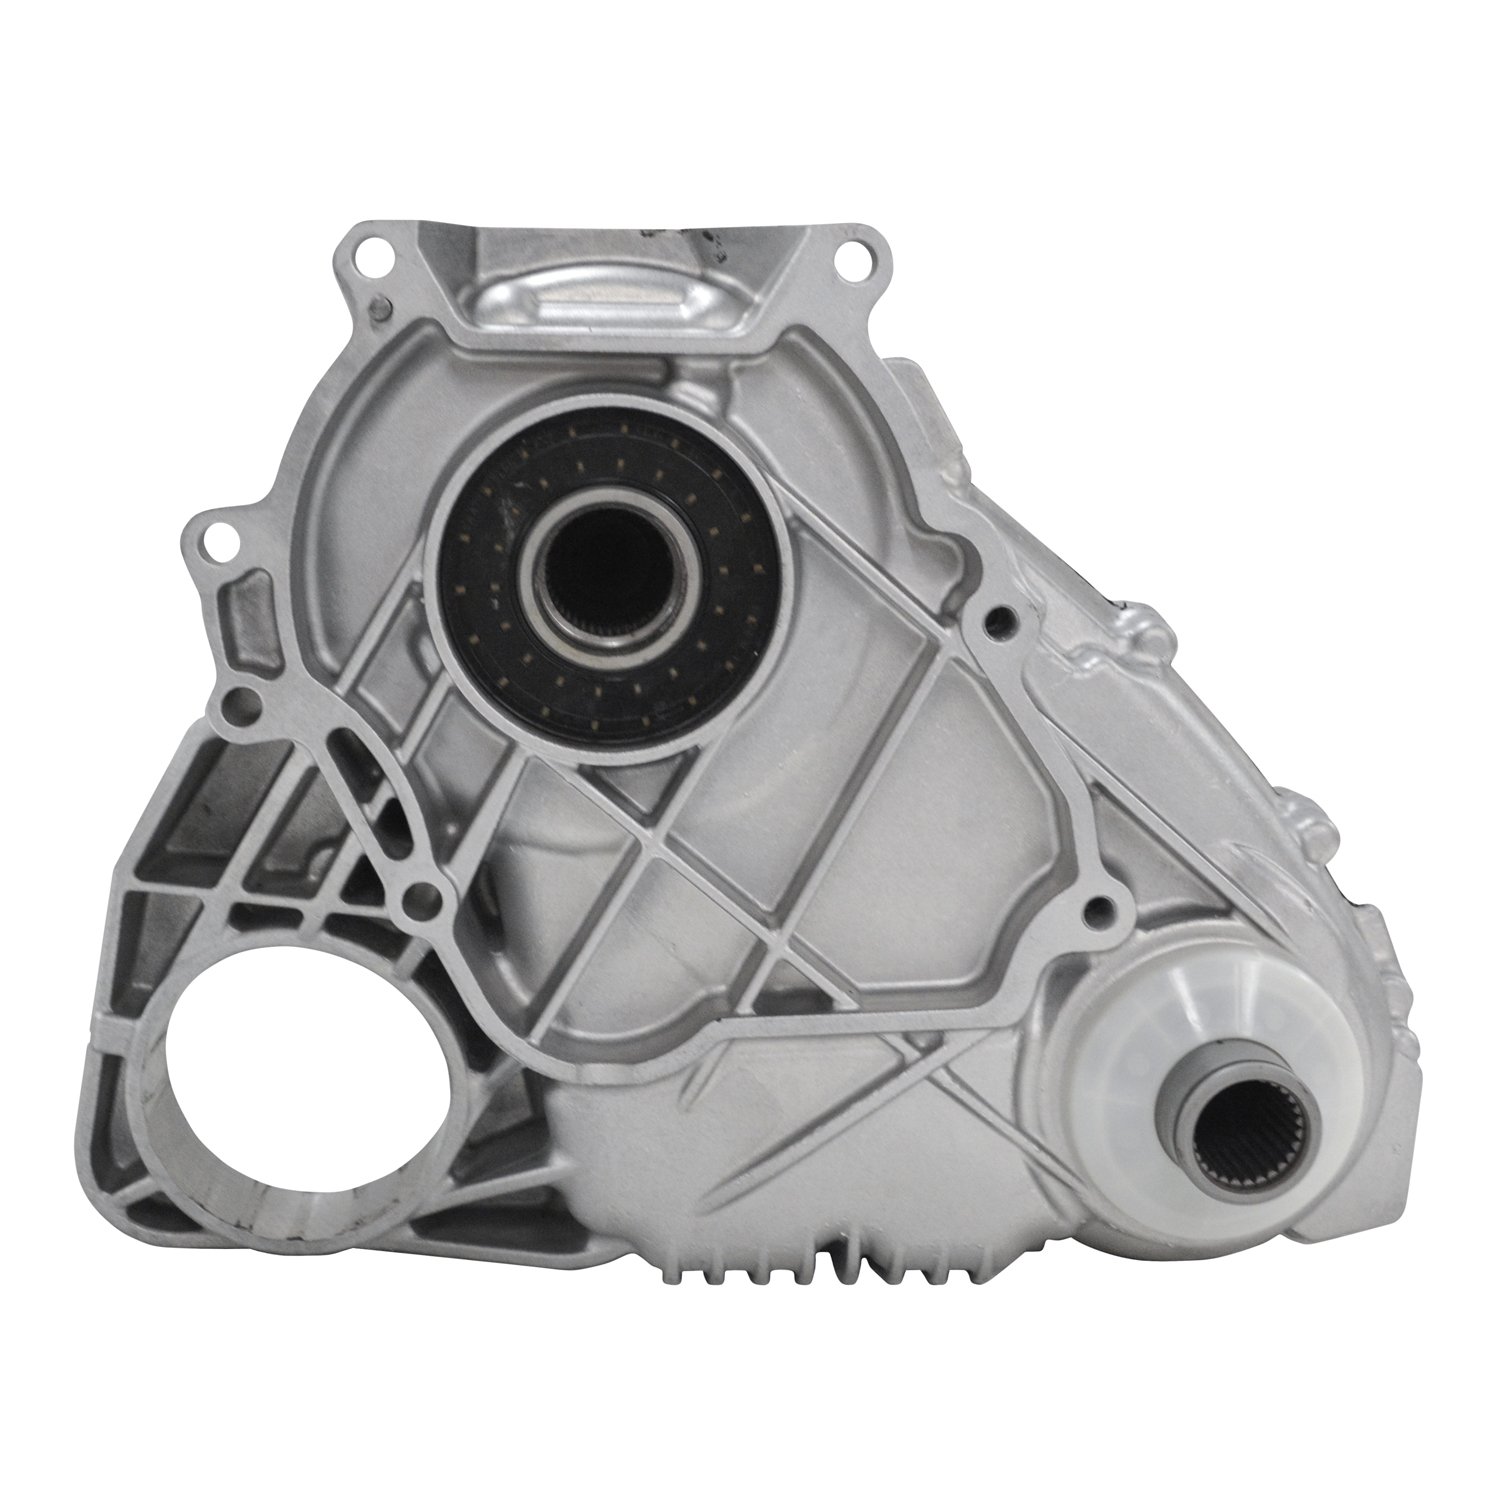 Remanufactured Transfer Case for BMW 2011-2012 X5 &